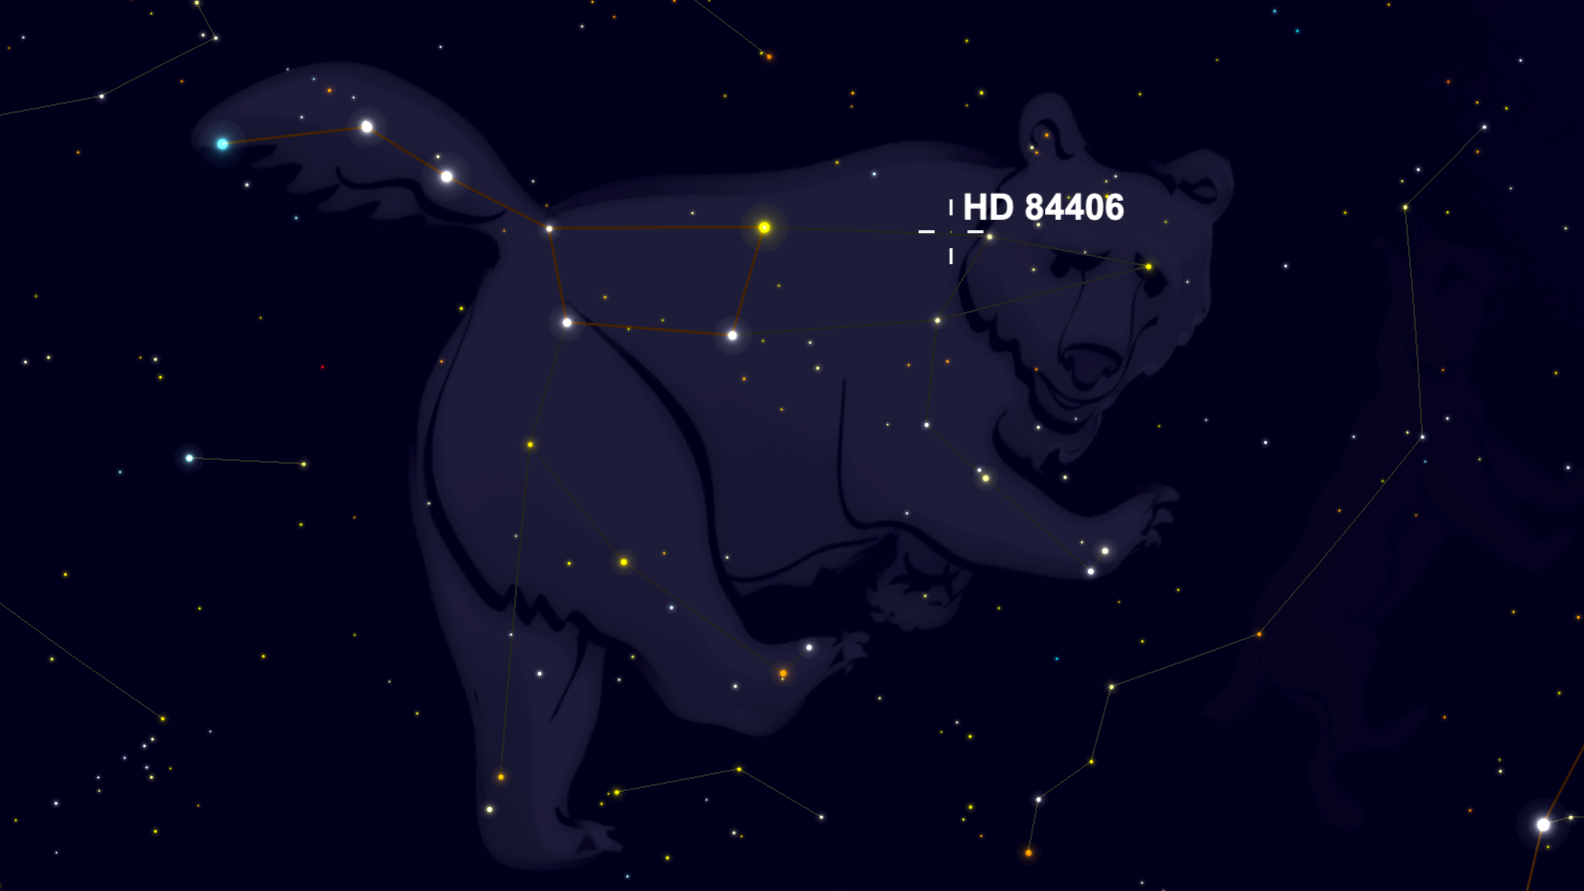 Daily News | Online News The star HD 84406 is located in the constellation Ursa Major, near the Big Dipper.